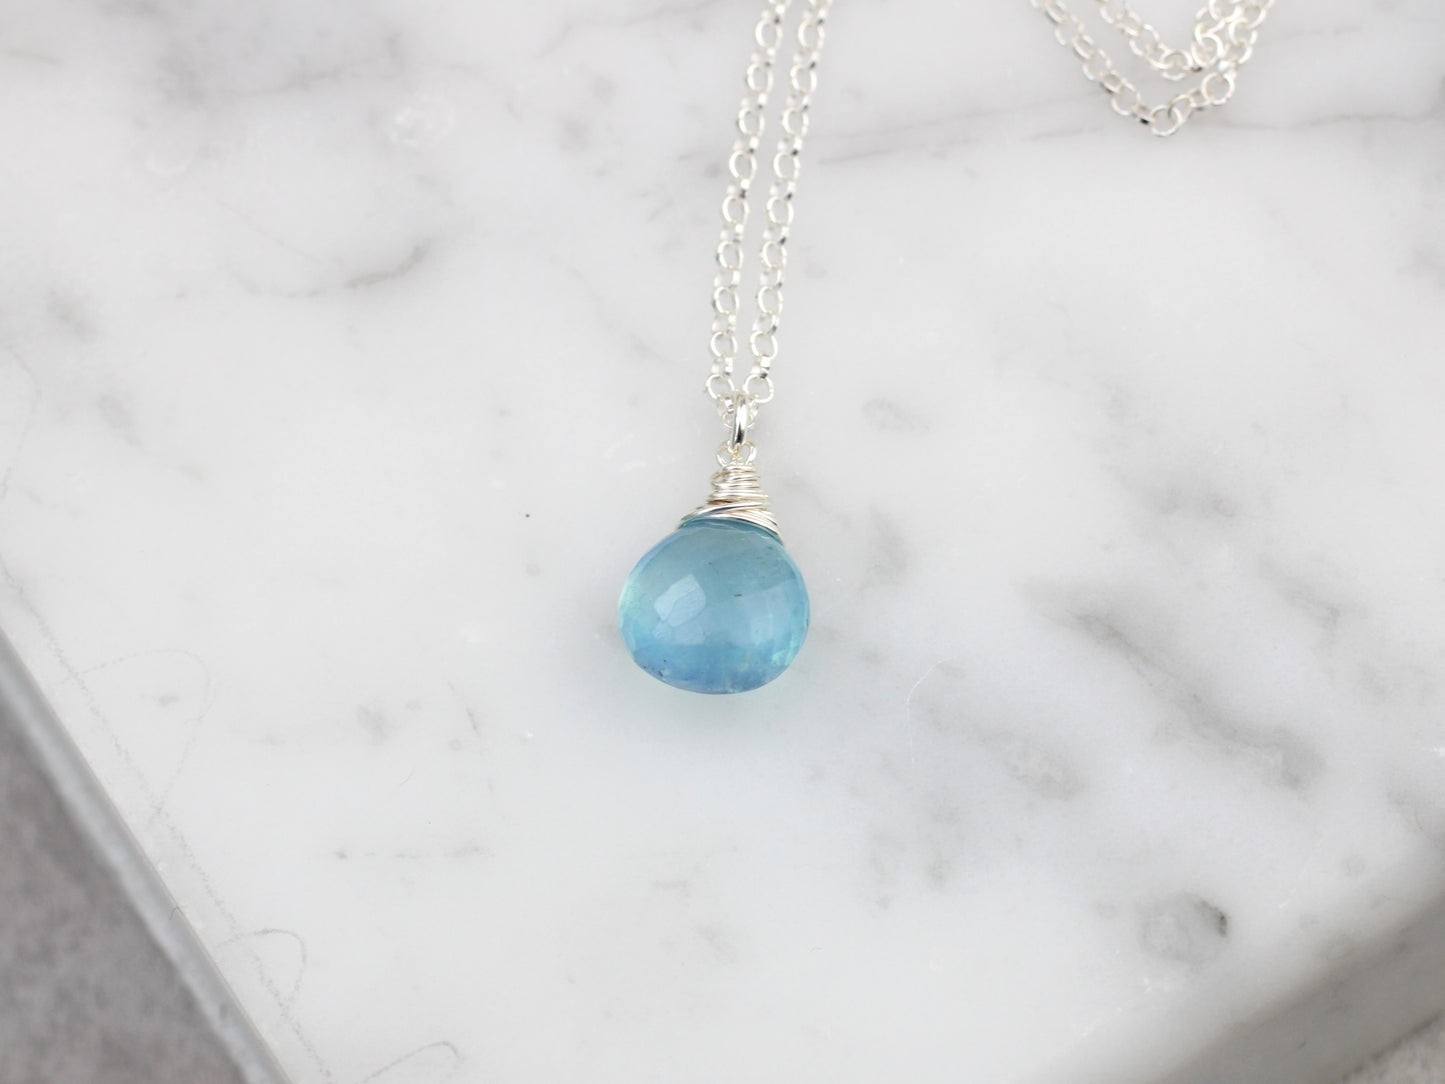 Aquamarine necklace in silver or gold.